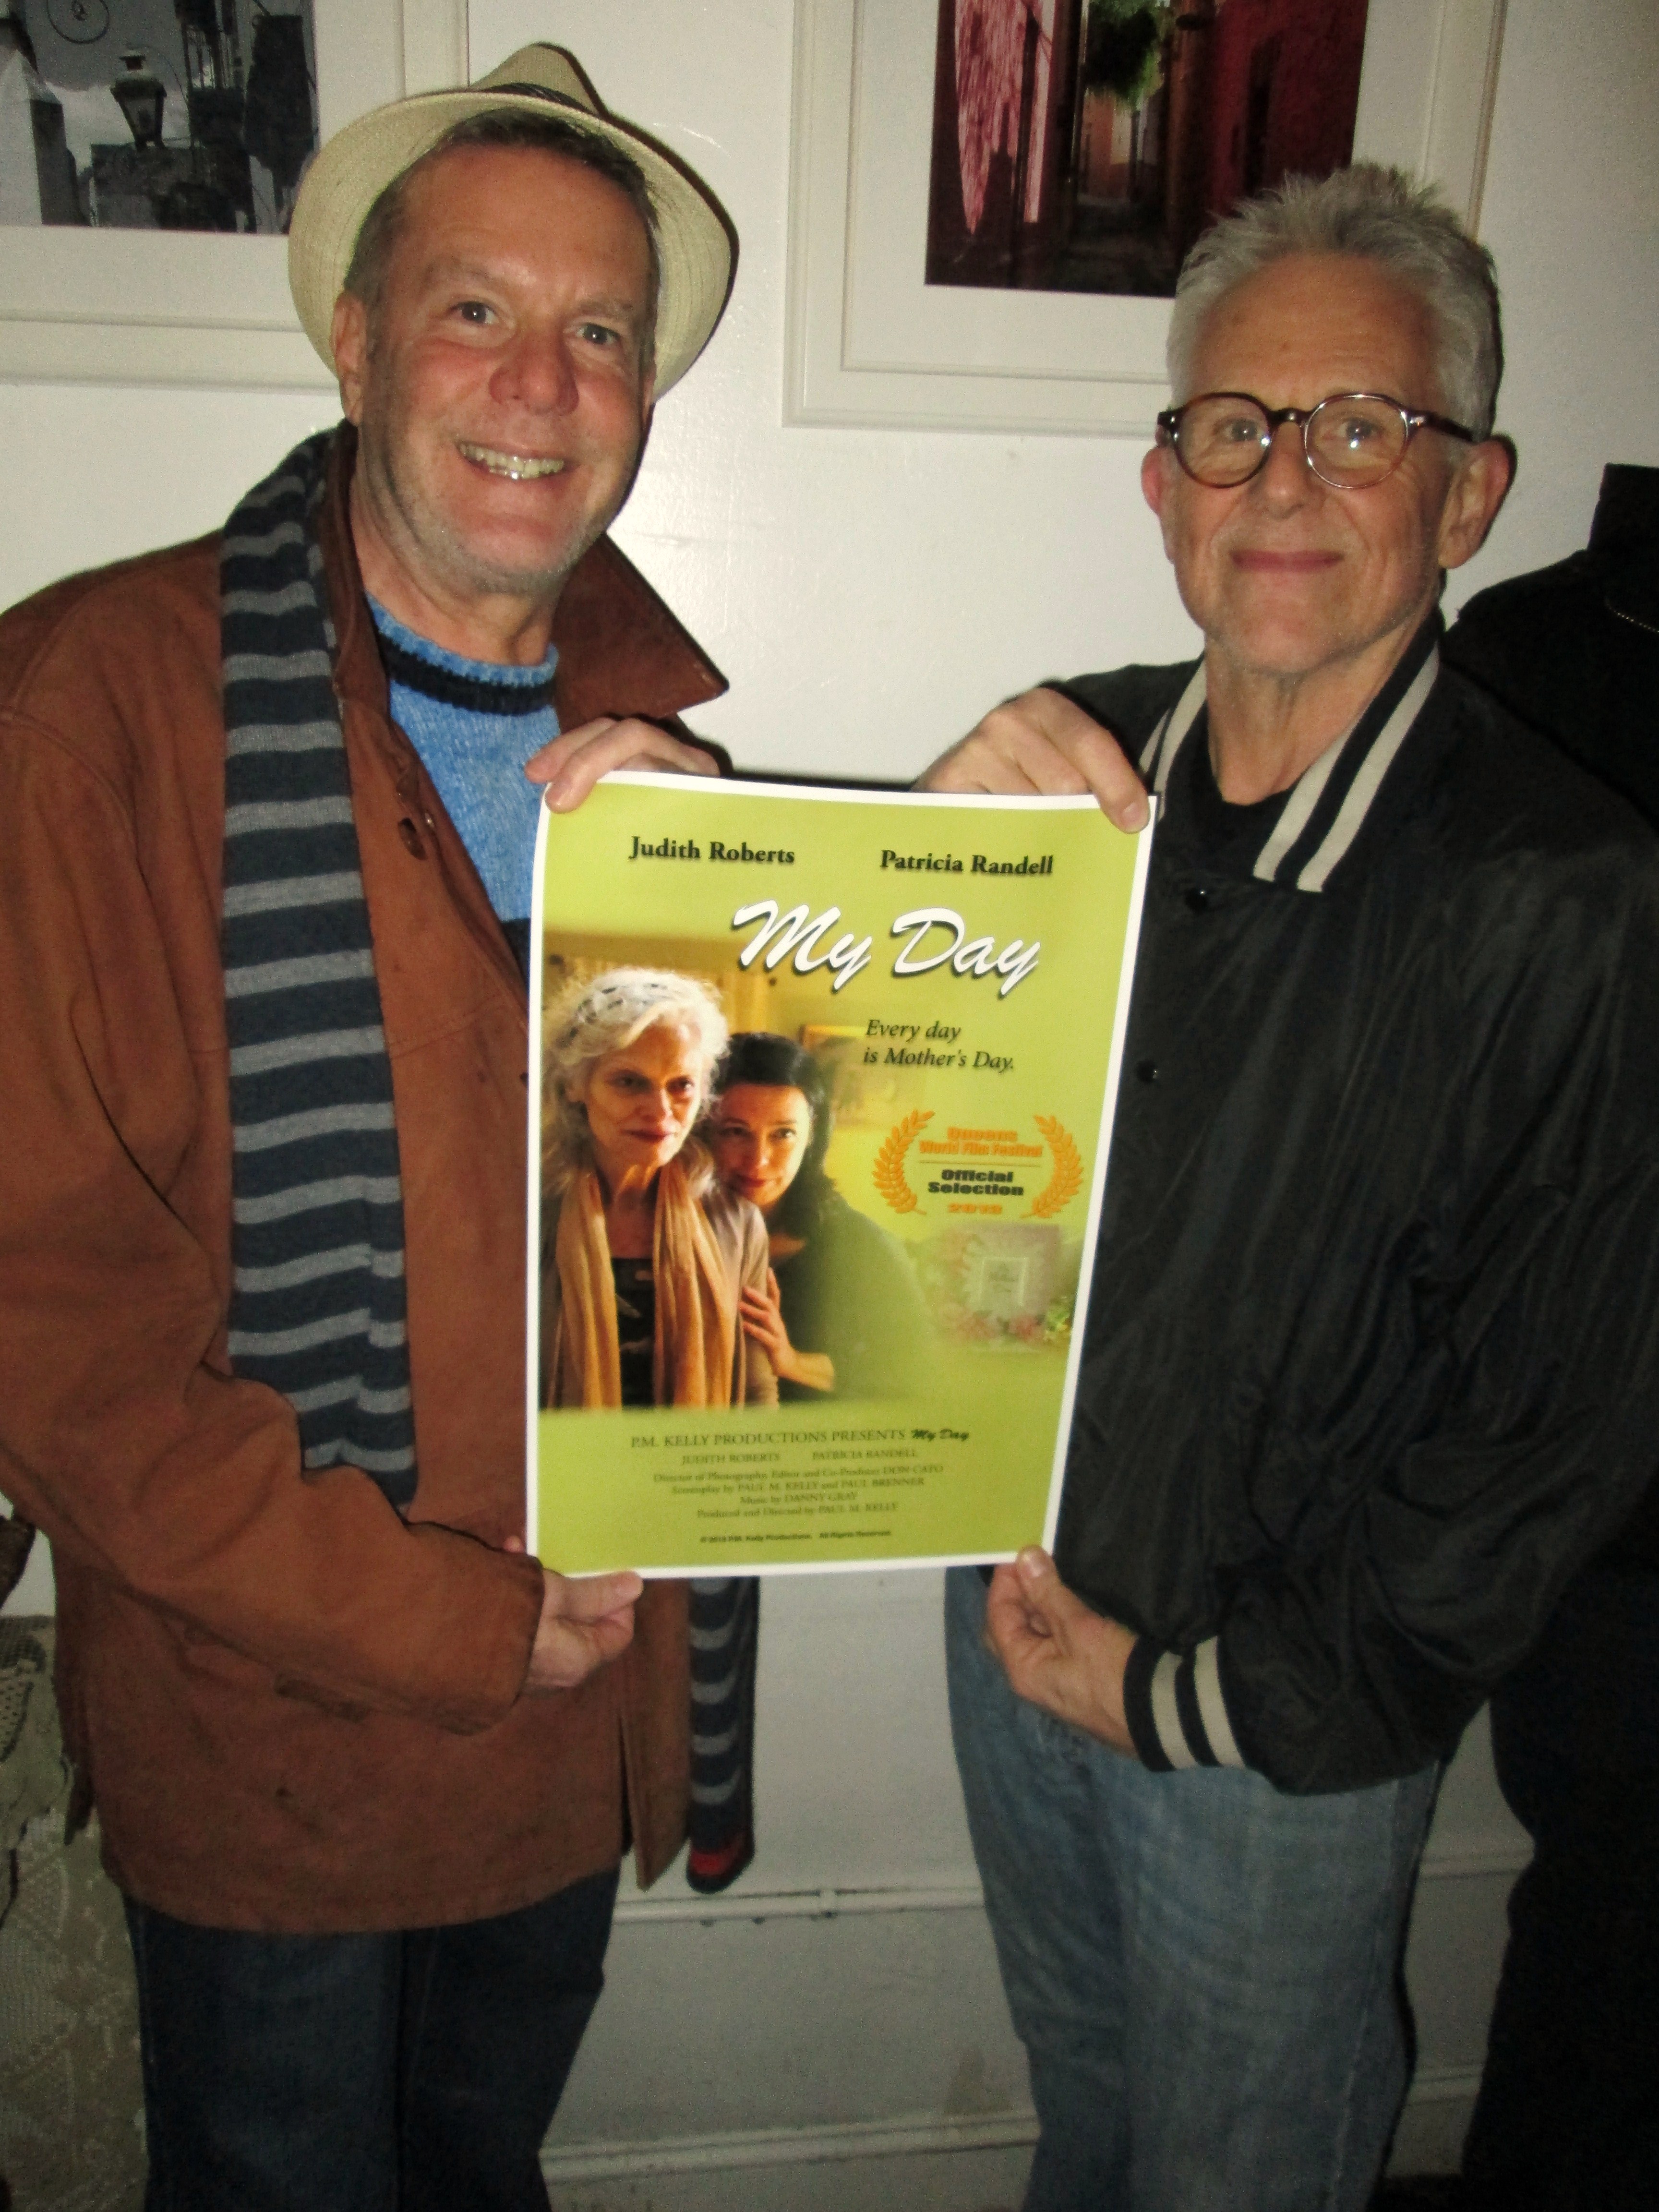 Queens World Film Festival Movie Trailer Party, March 3, 2013--Jackson Heights filmmakers, Paul Kelly and Don Cato.